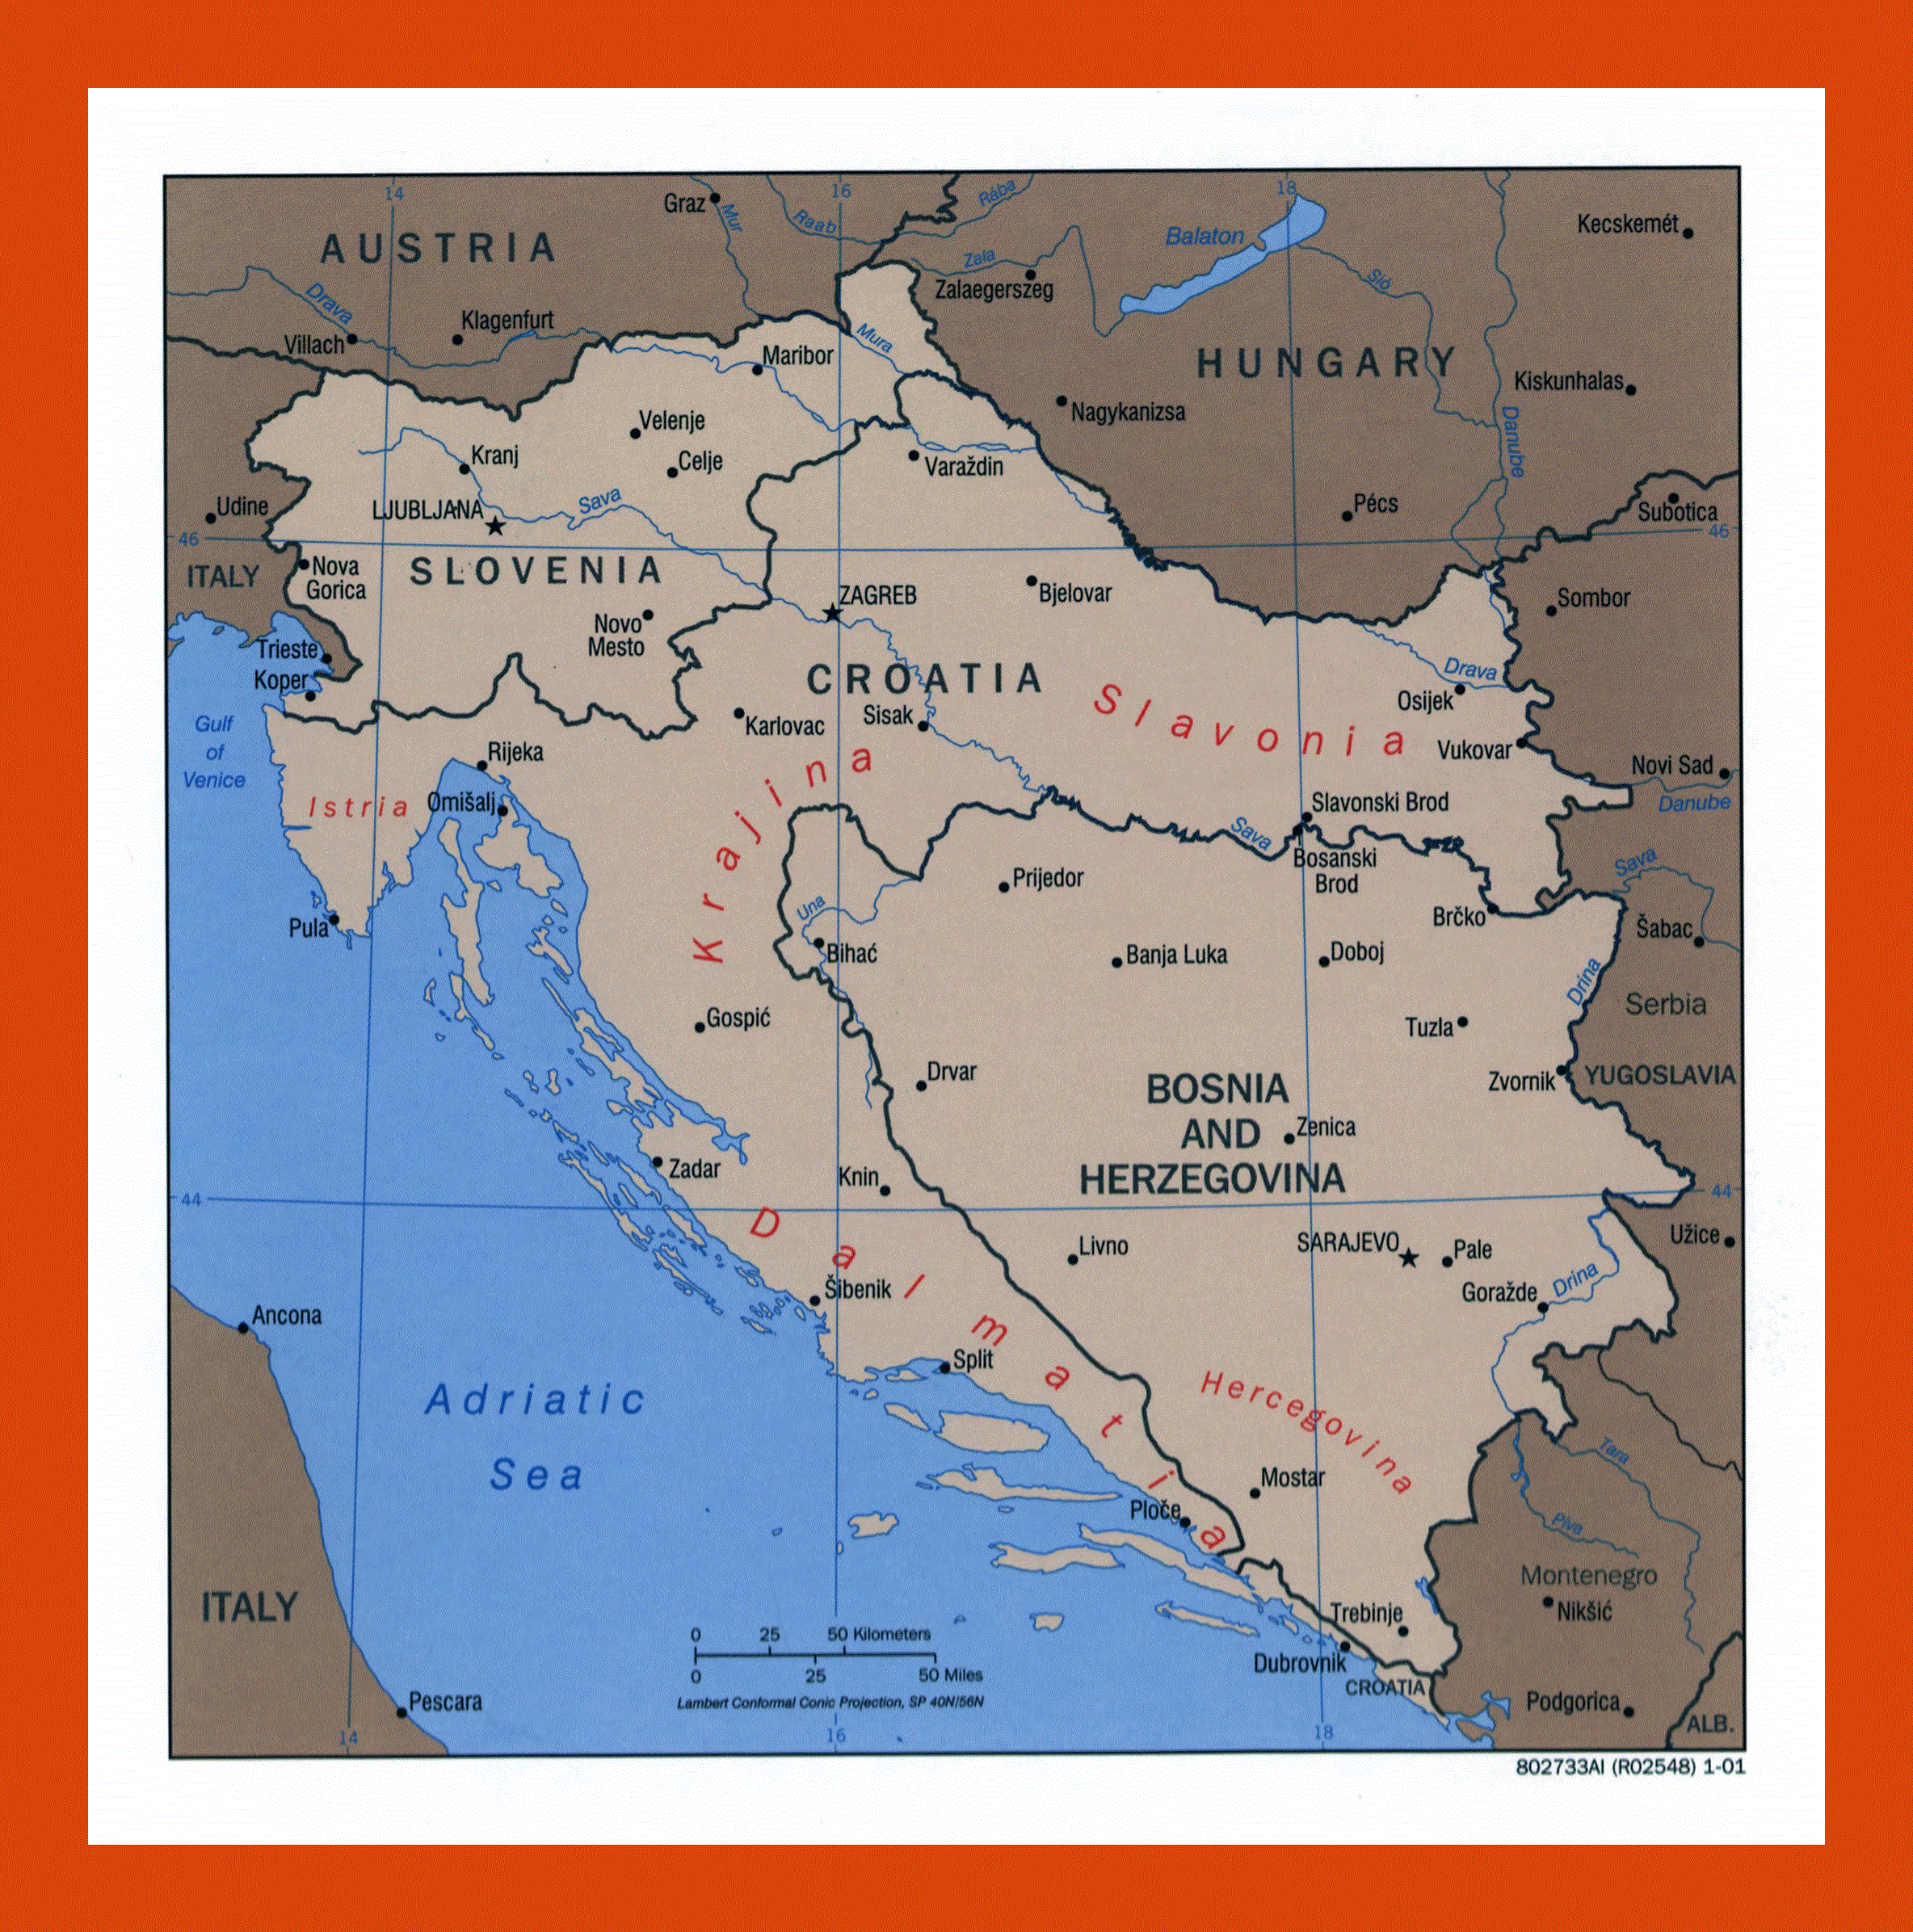 Political map of the Western Former Yugoslav Republics - 2001 | Maps of ...